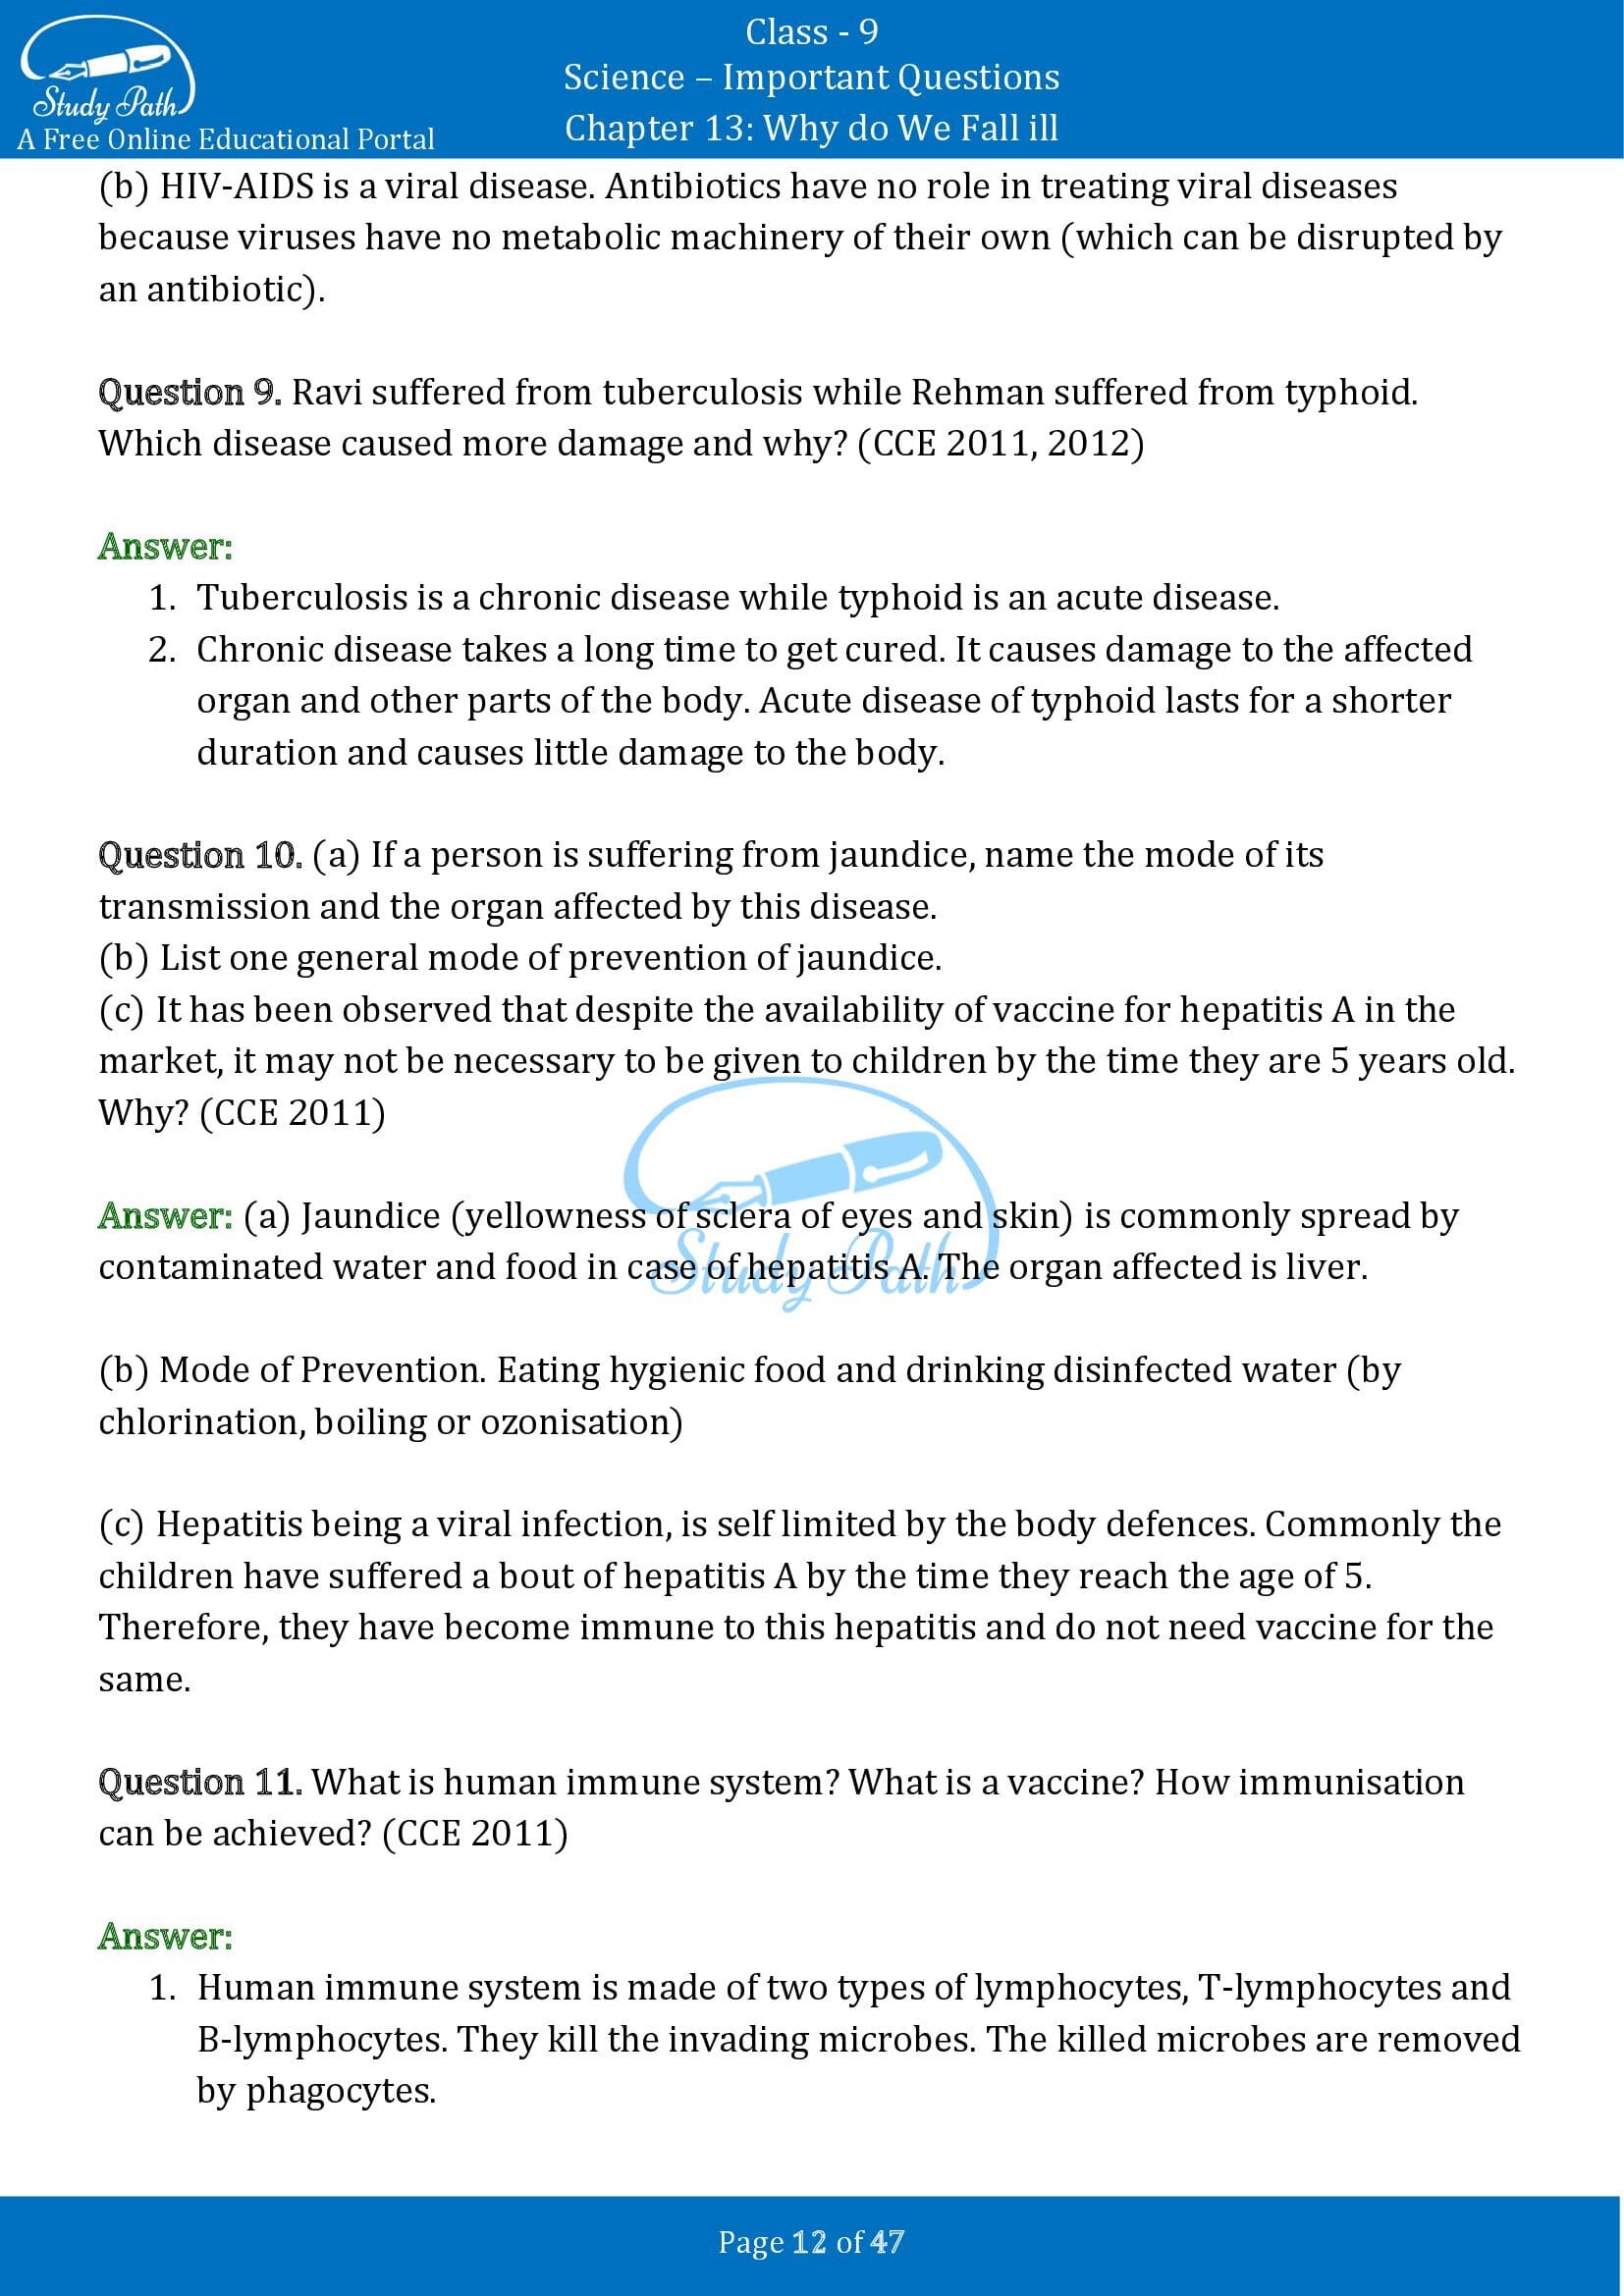 Important Questions for Class 9 Science Chapter 13 Why do We Fall ill 00012